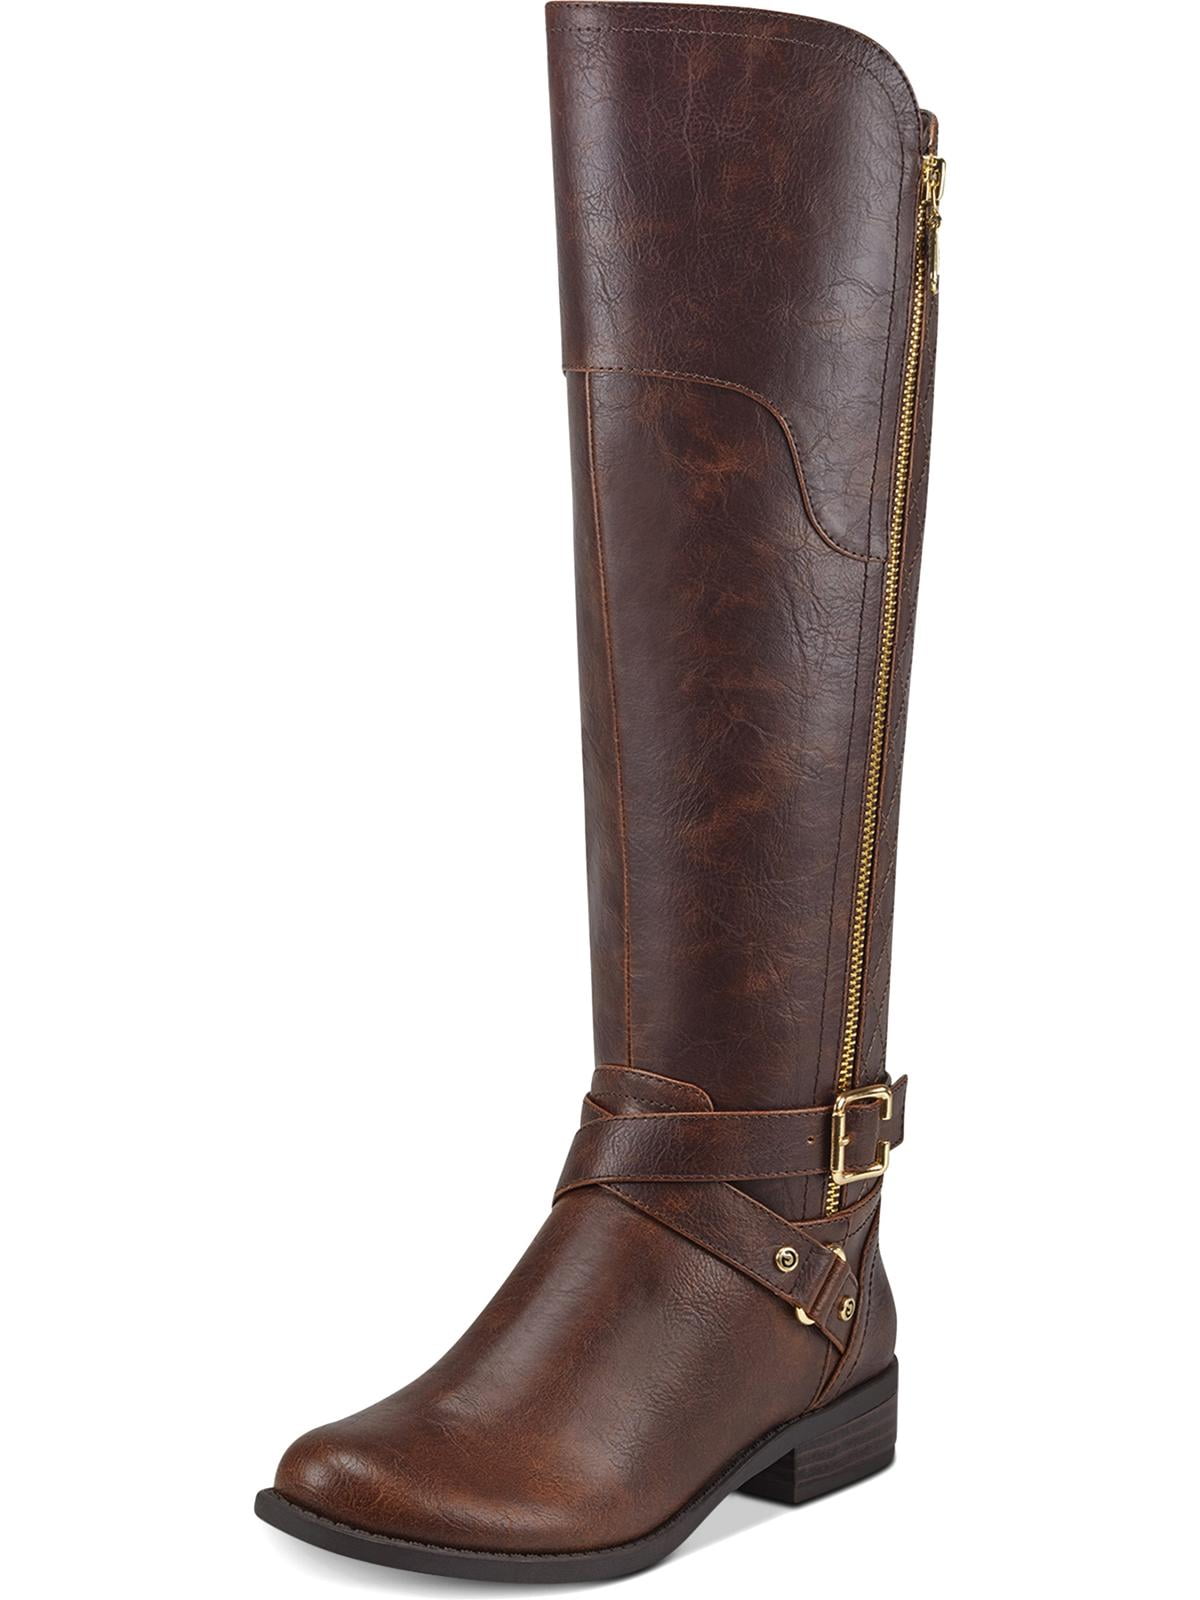 Buy > g by guess brown boots > in stock